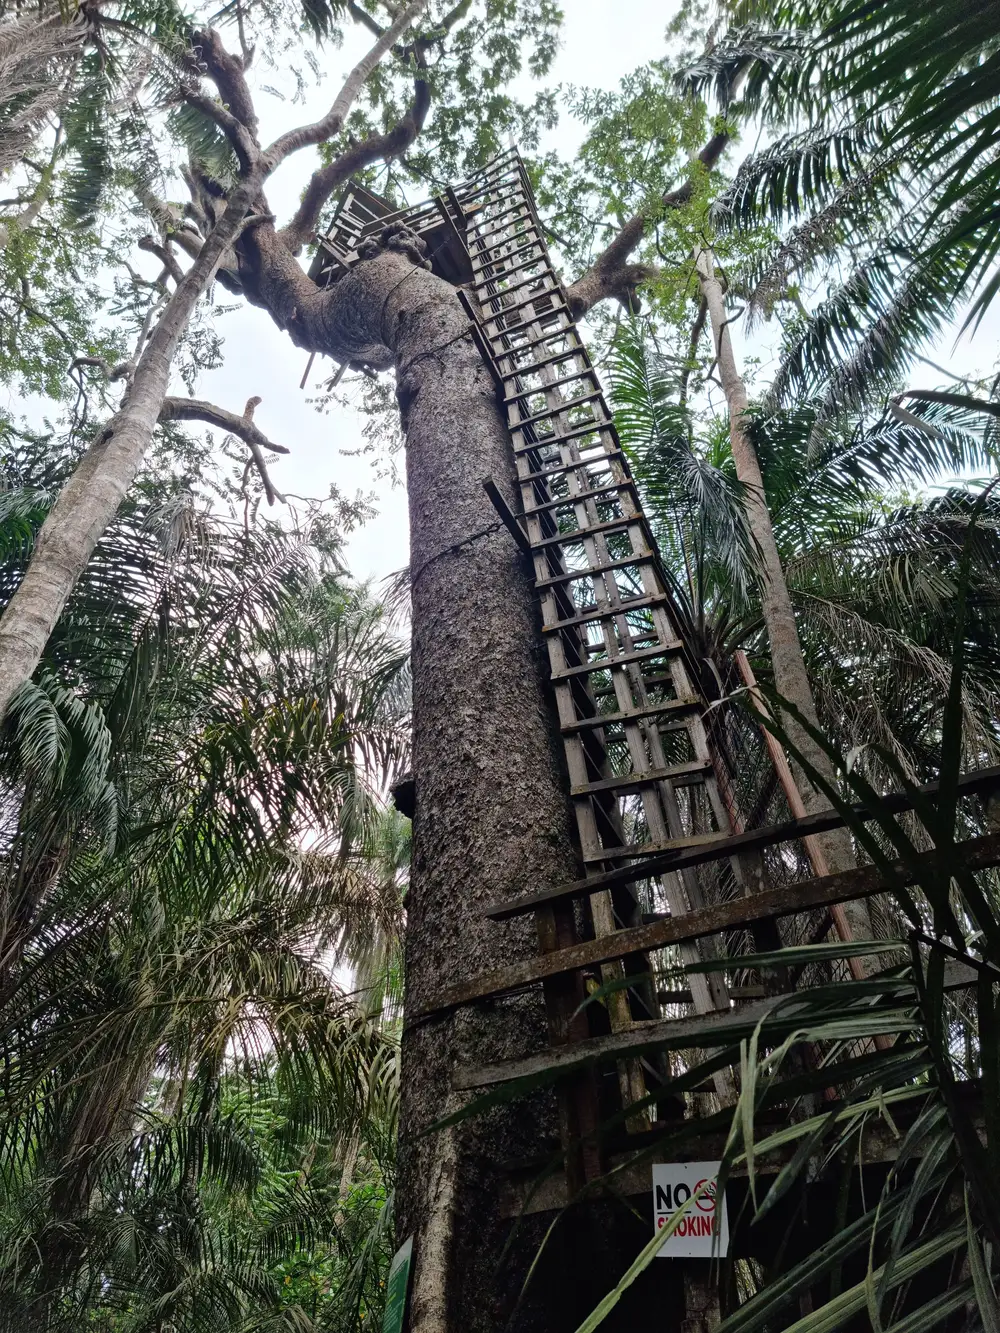 A ladder attached to a tree